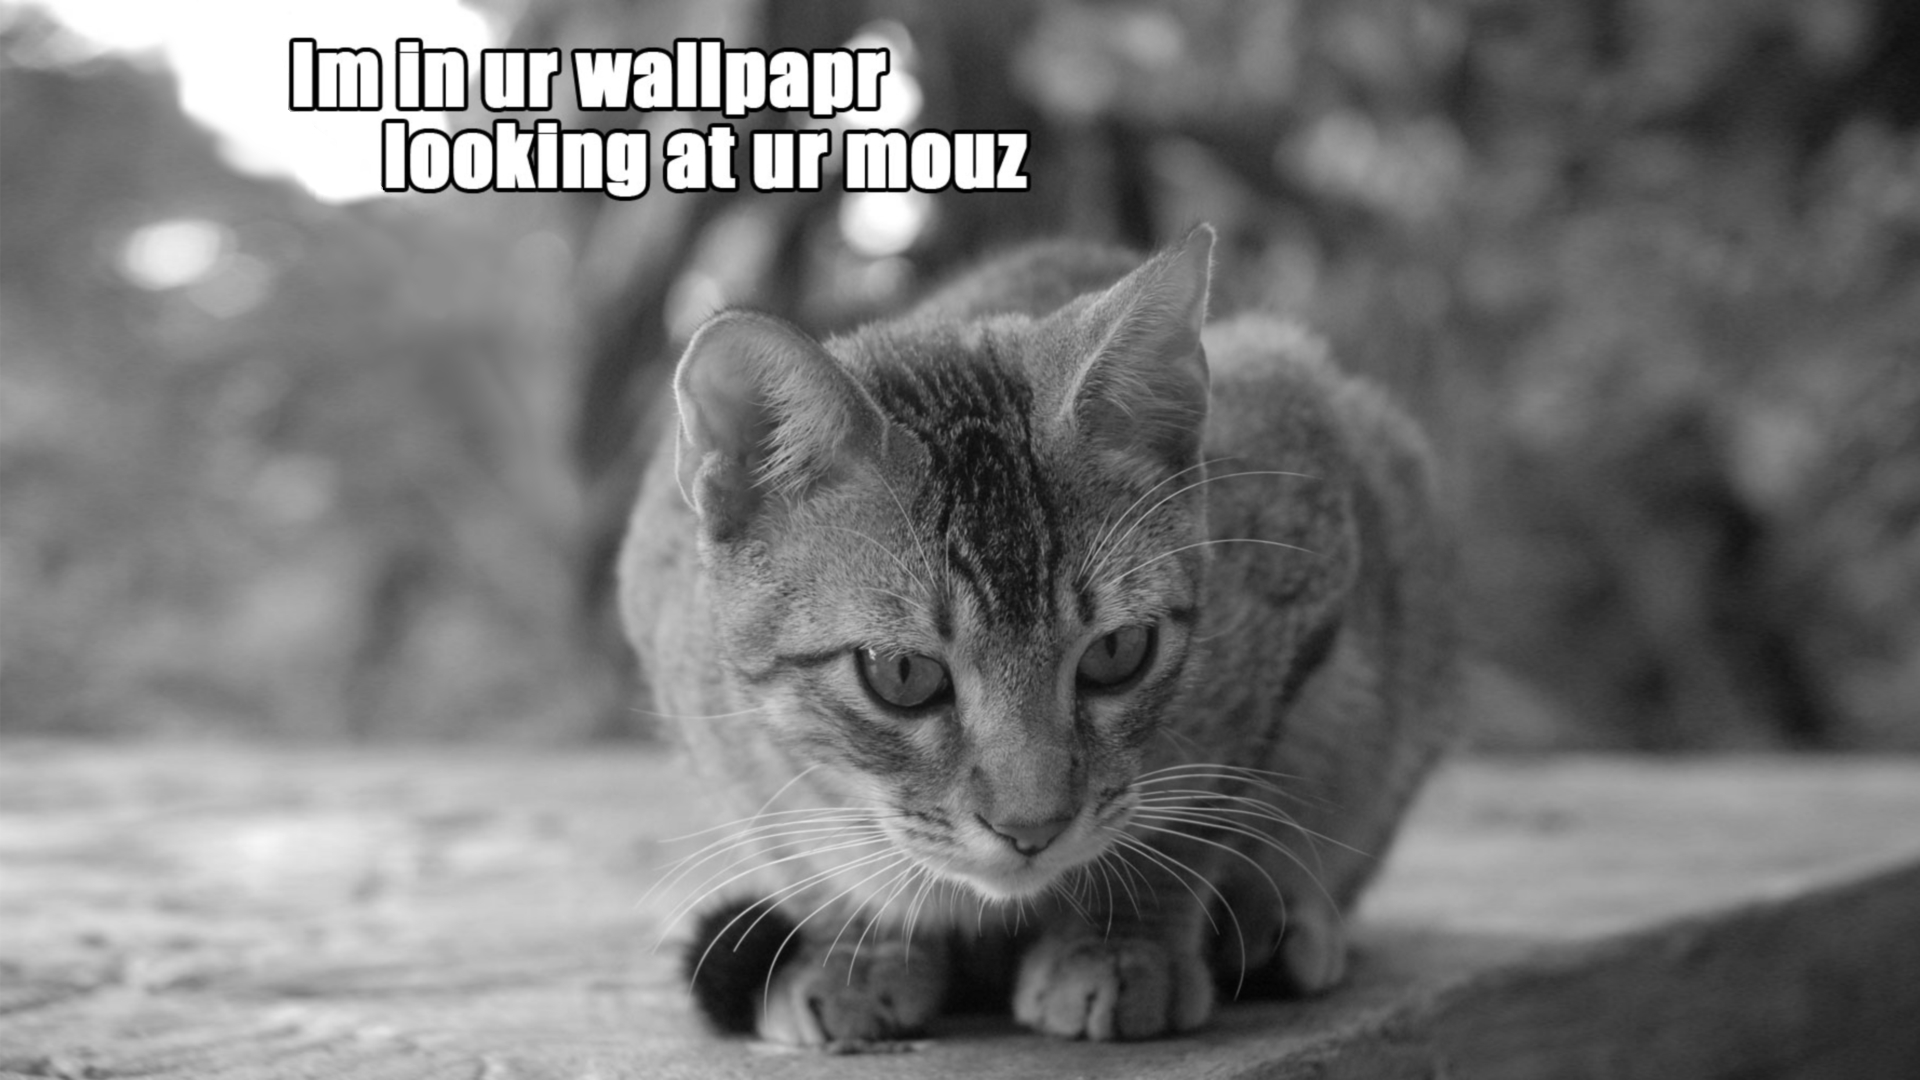 Cats Humor Wallpaper 1920x1080 Cats Humor Mouse Staring Monochrome